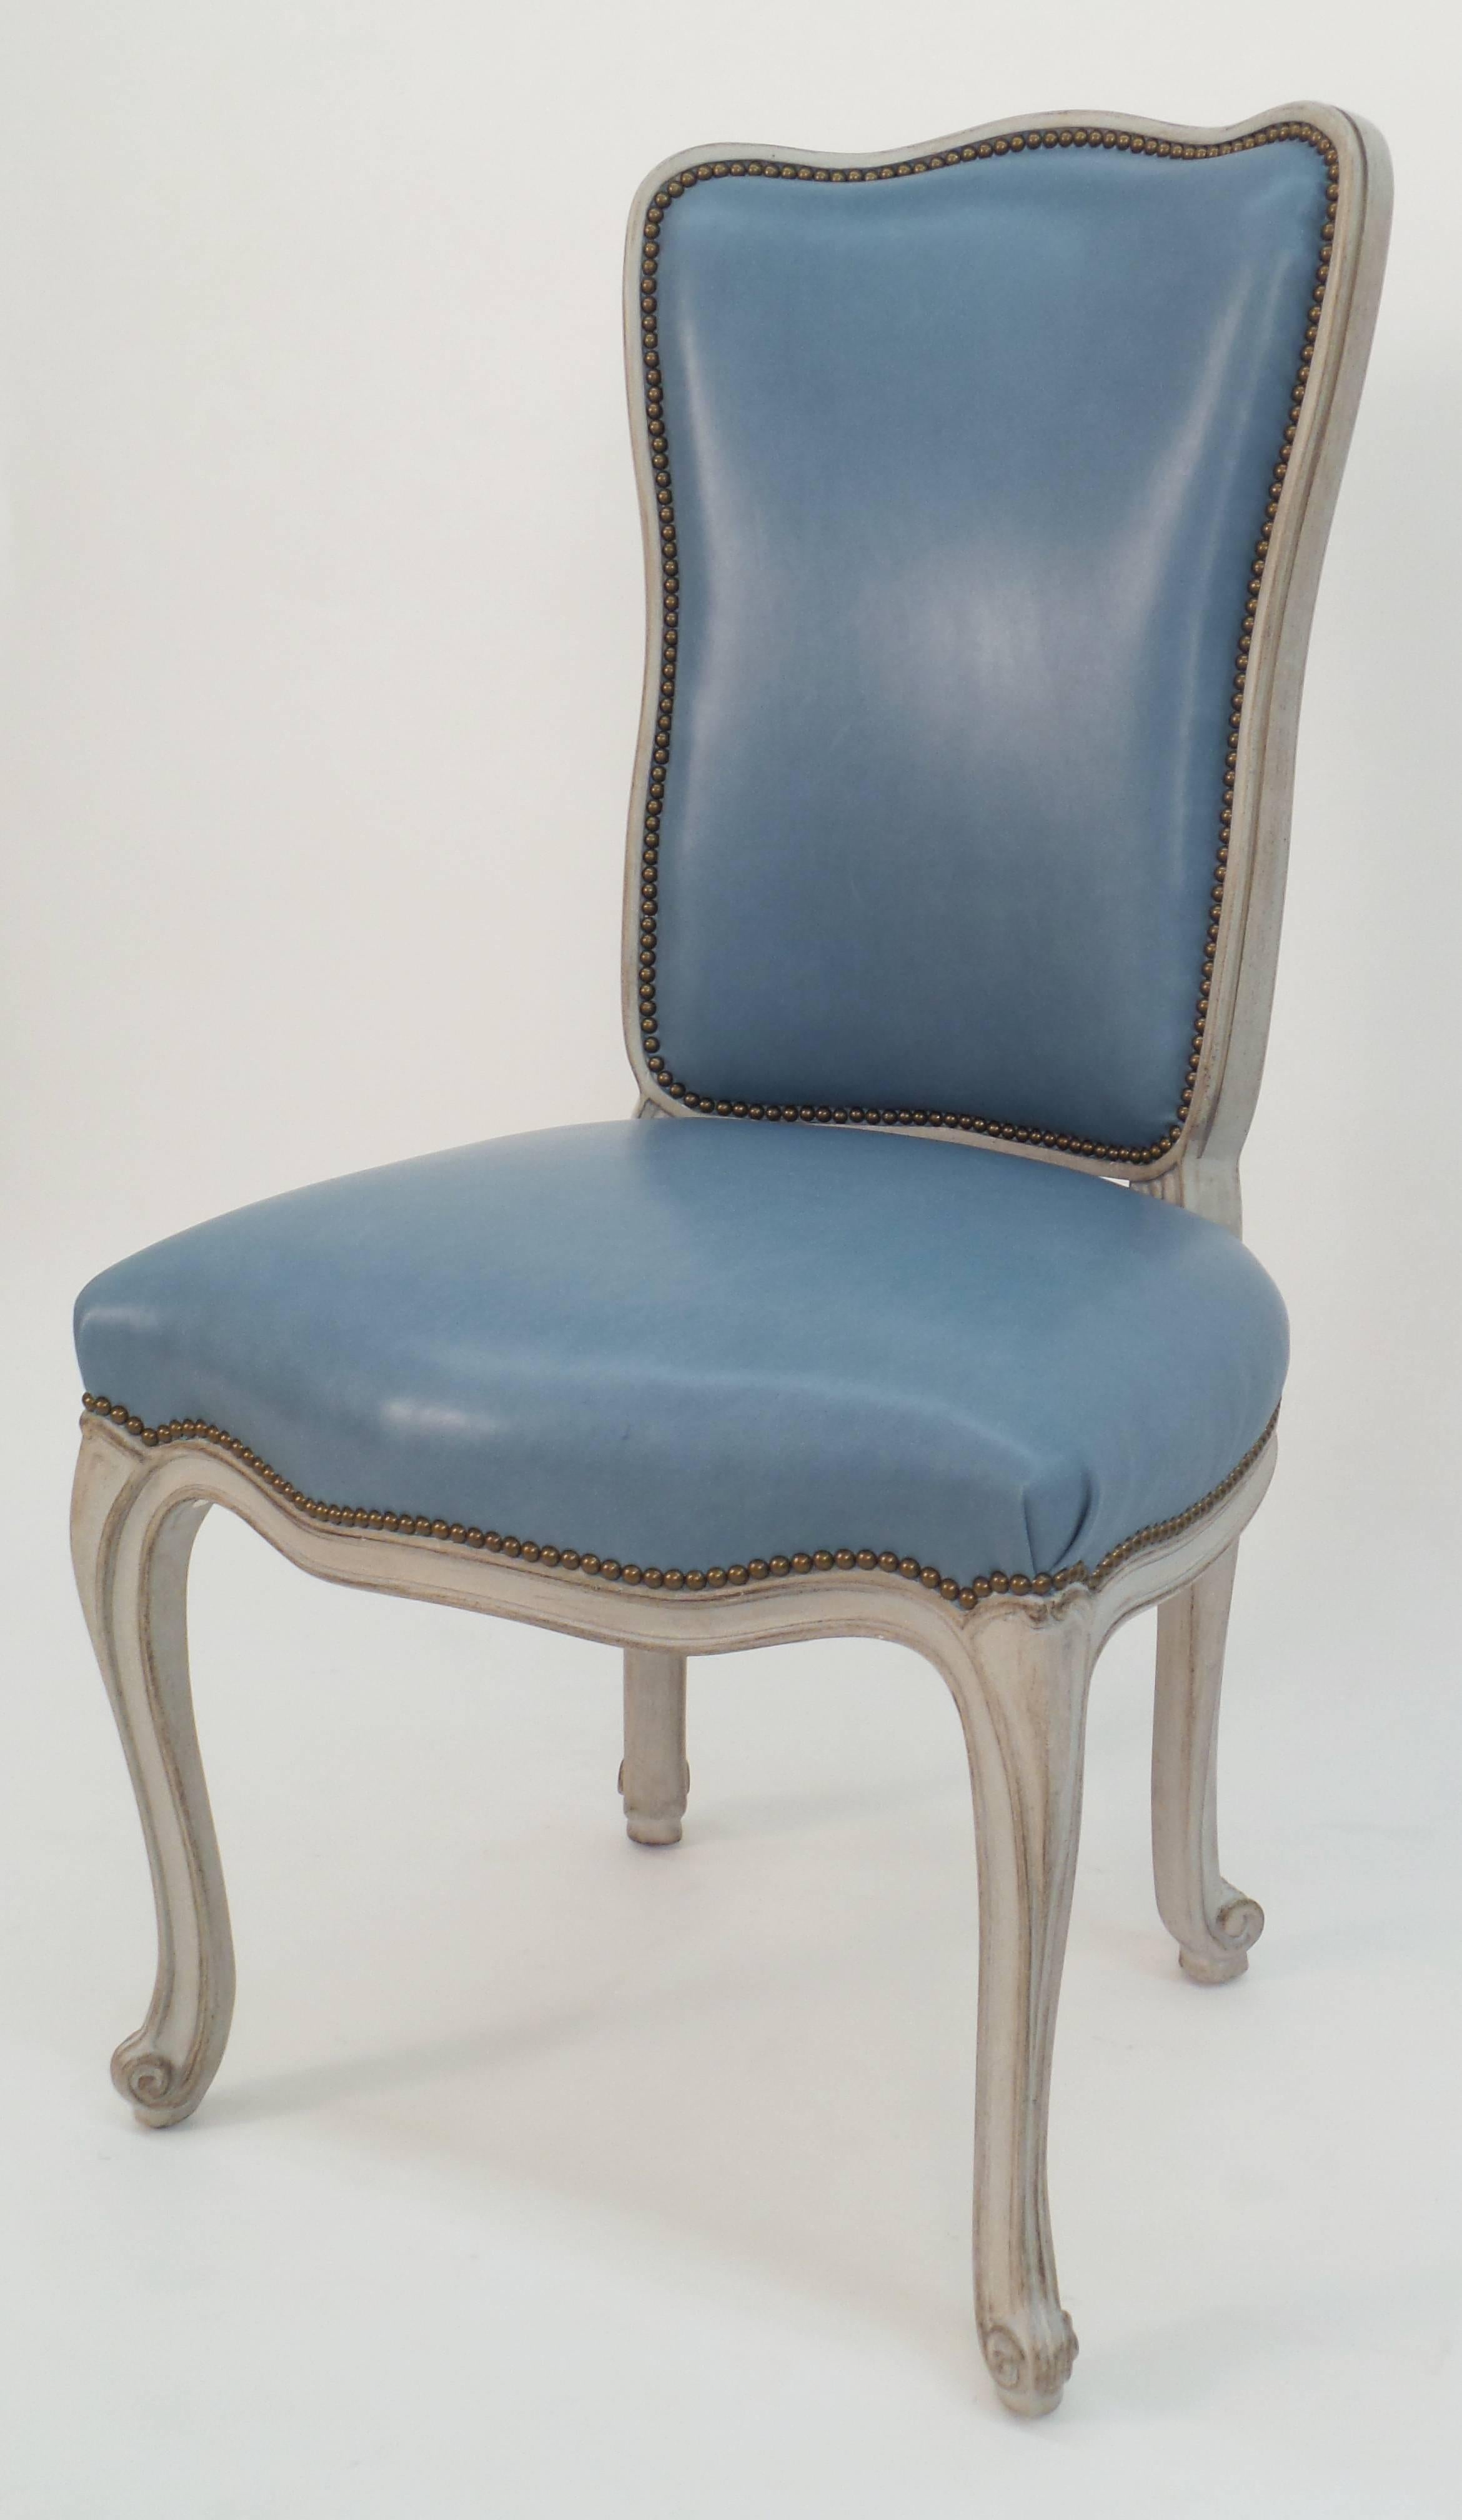 The Beistegui model Louis XV style high back side chair, designed in the style of the Carlos de Beistegui armchair, as depicted in the painting of Mr. Beistegui's apartment by Jeremiah Goodman. Custom upholstery options and finishes available on